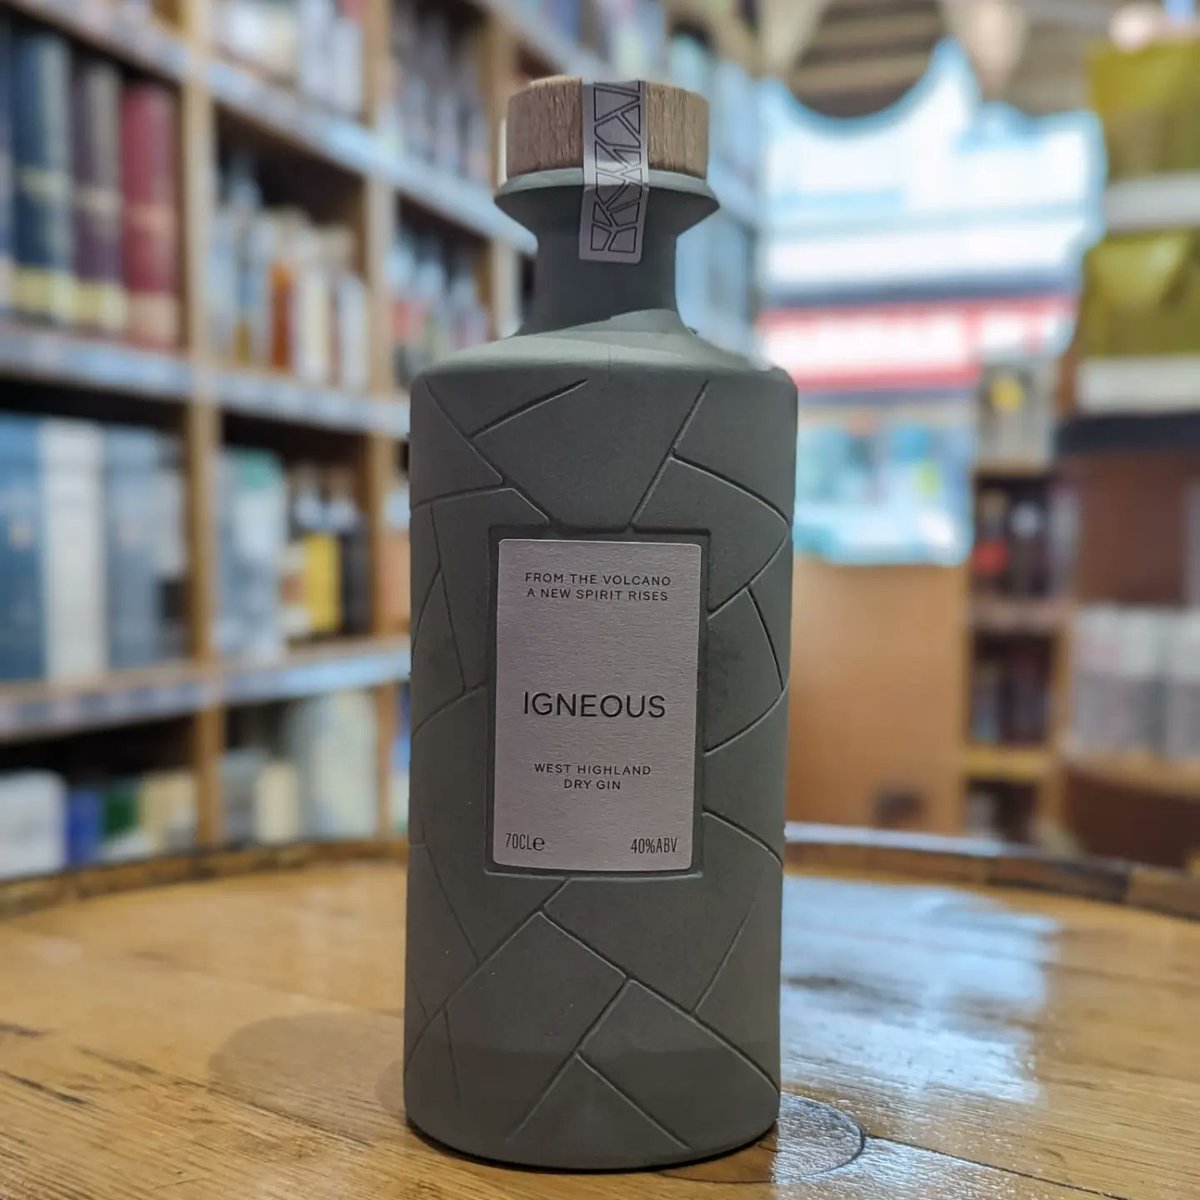 Let's Celebrate #InternationalScottishGinDay with the latest addition to our gin shelf. Igneous Gin made at a distillery built within a crater of an extinct volcano on the Ardnamurchan peninsula 
#ISGD #ScottishGin #CraftGin